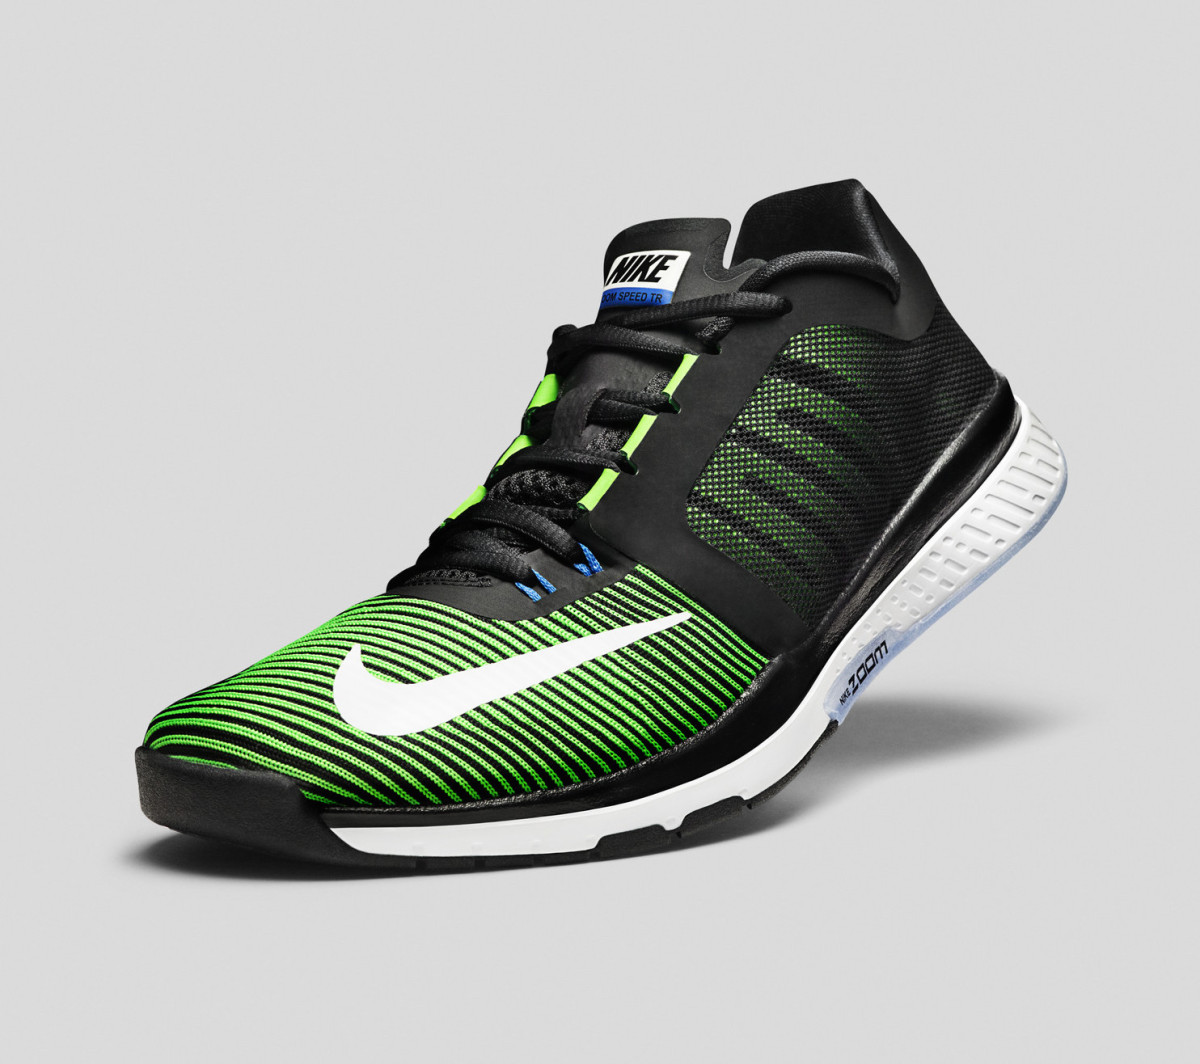 The Nike Zoom Speed Trainer 3 - Acquire